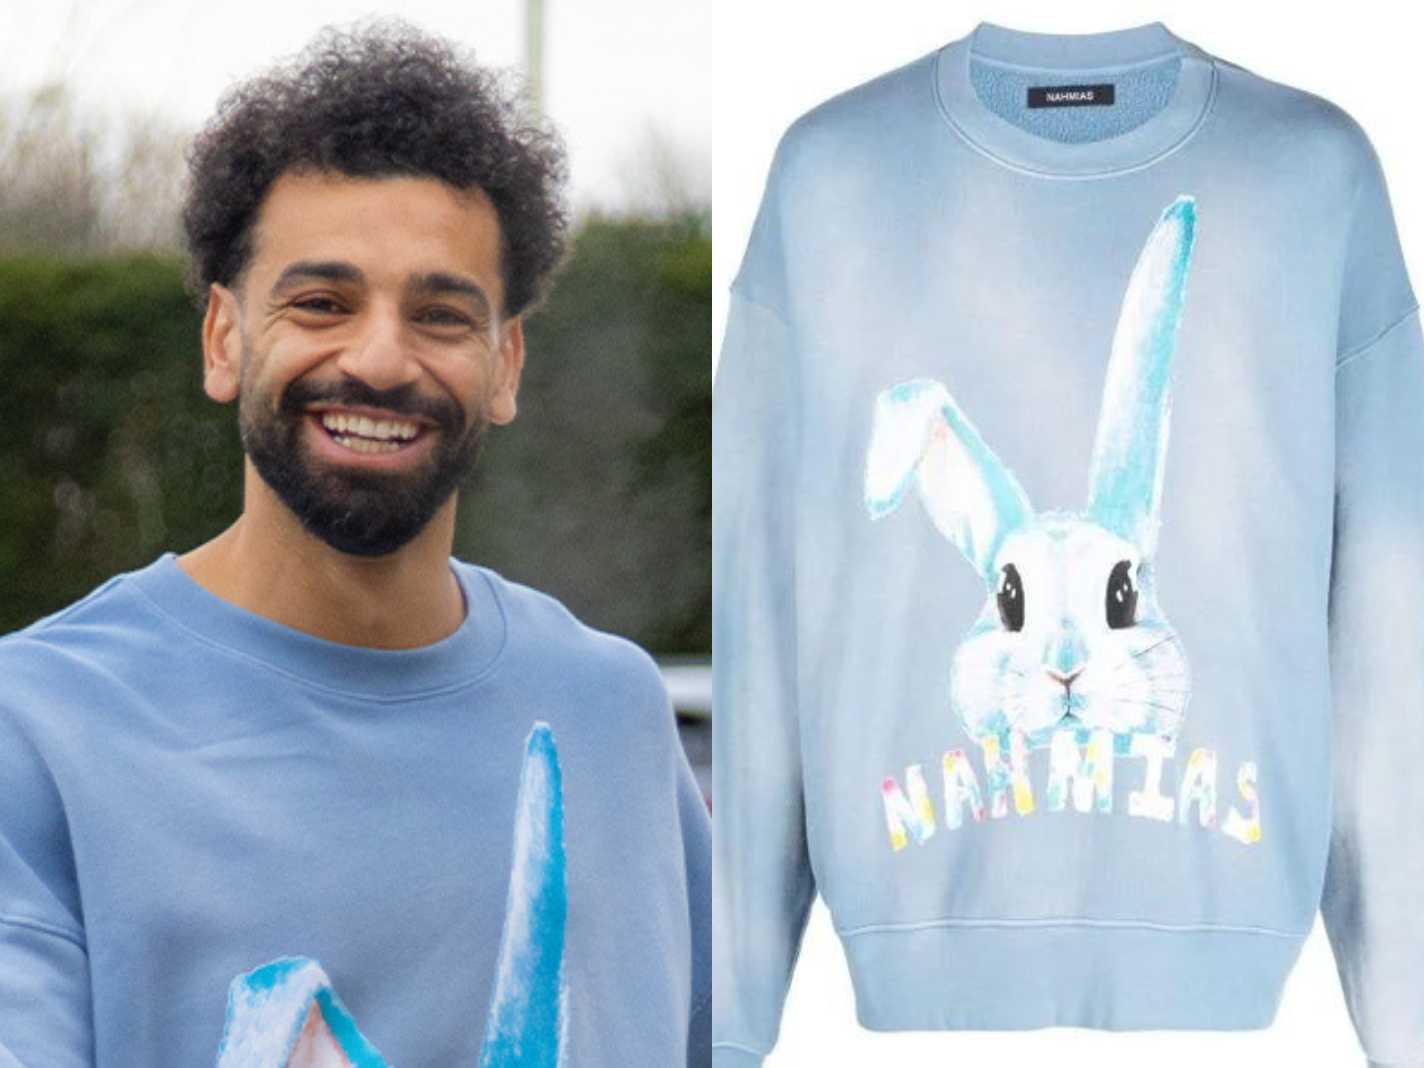 Mohamed Salah Rocks Oversized Nahmias Bunny Sweatshirt to Training – Where to Buy and How Much Does it Cost?